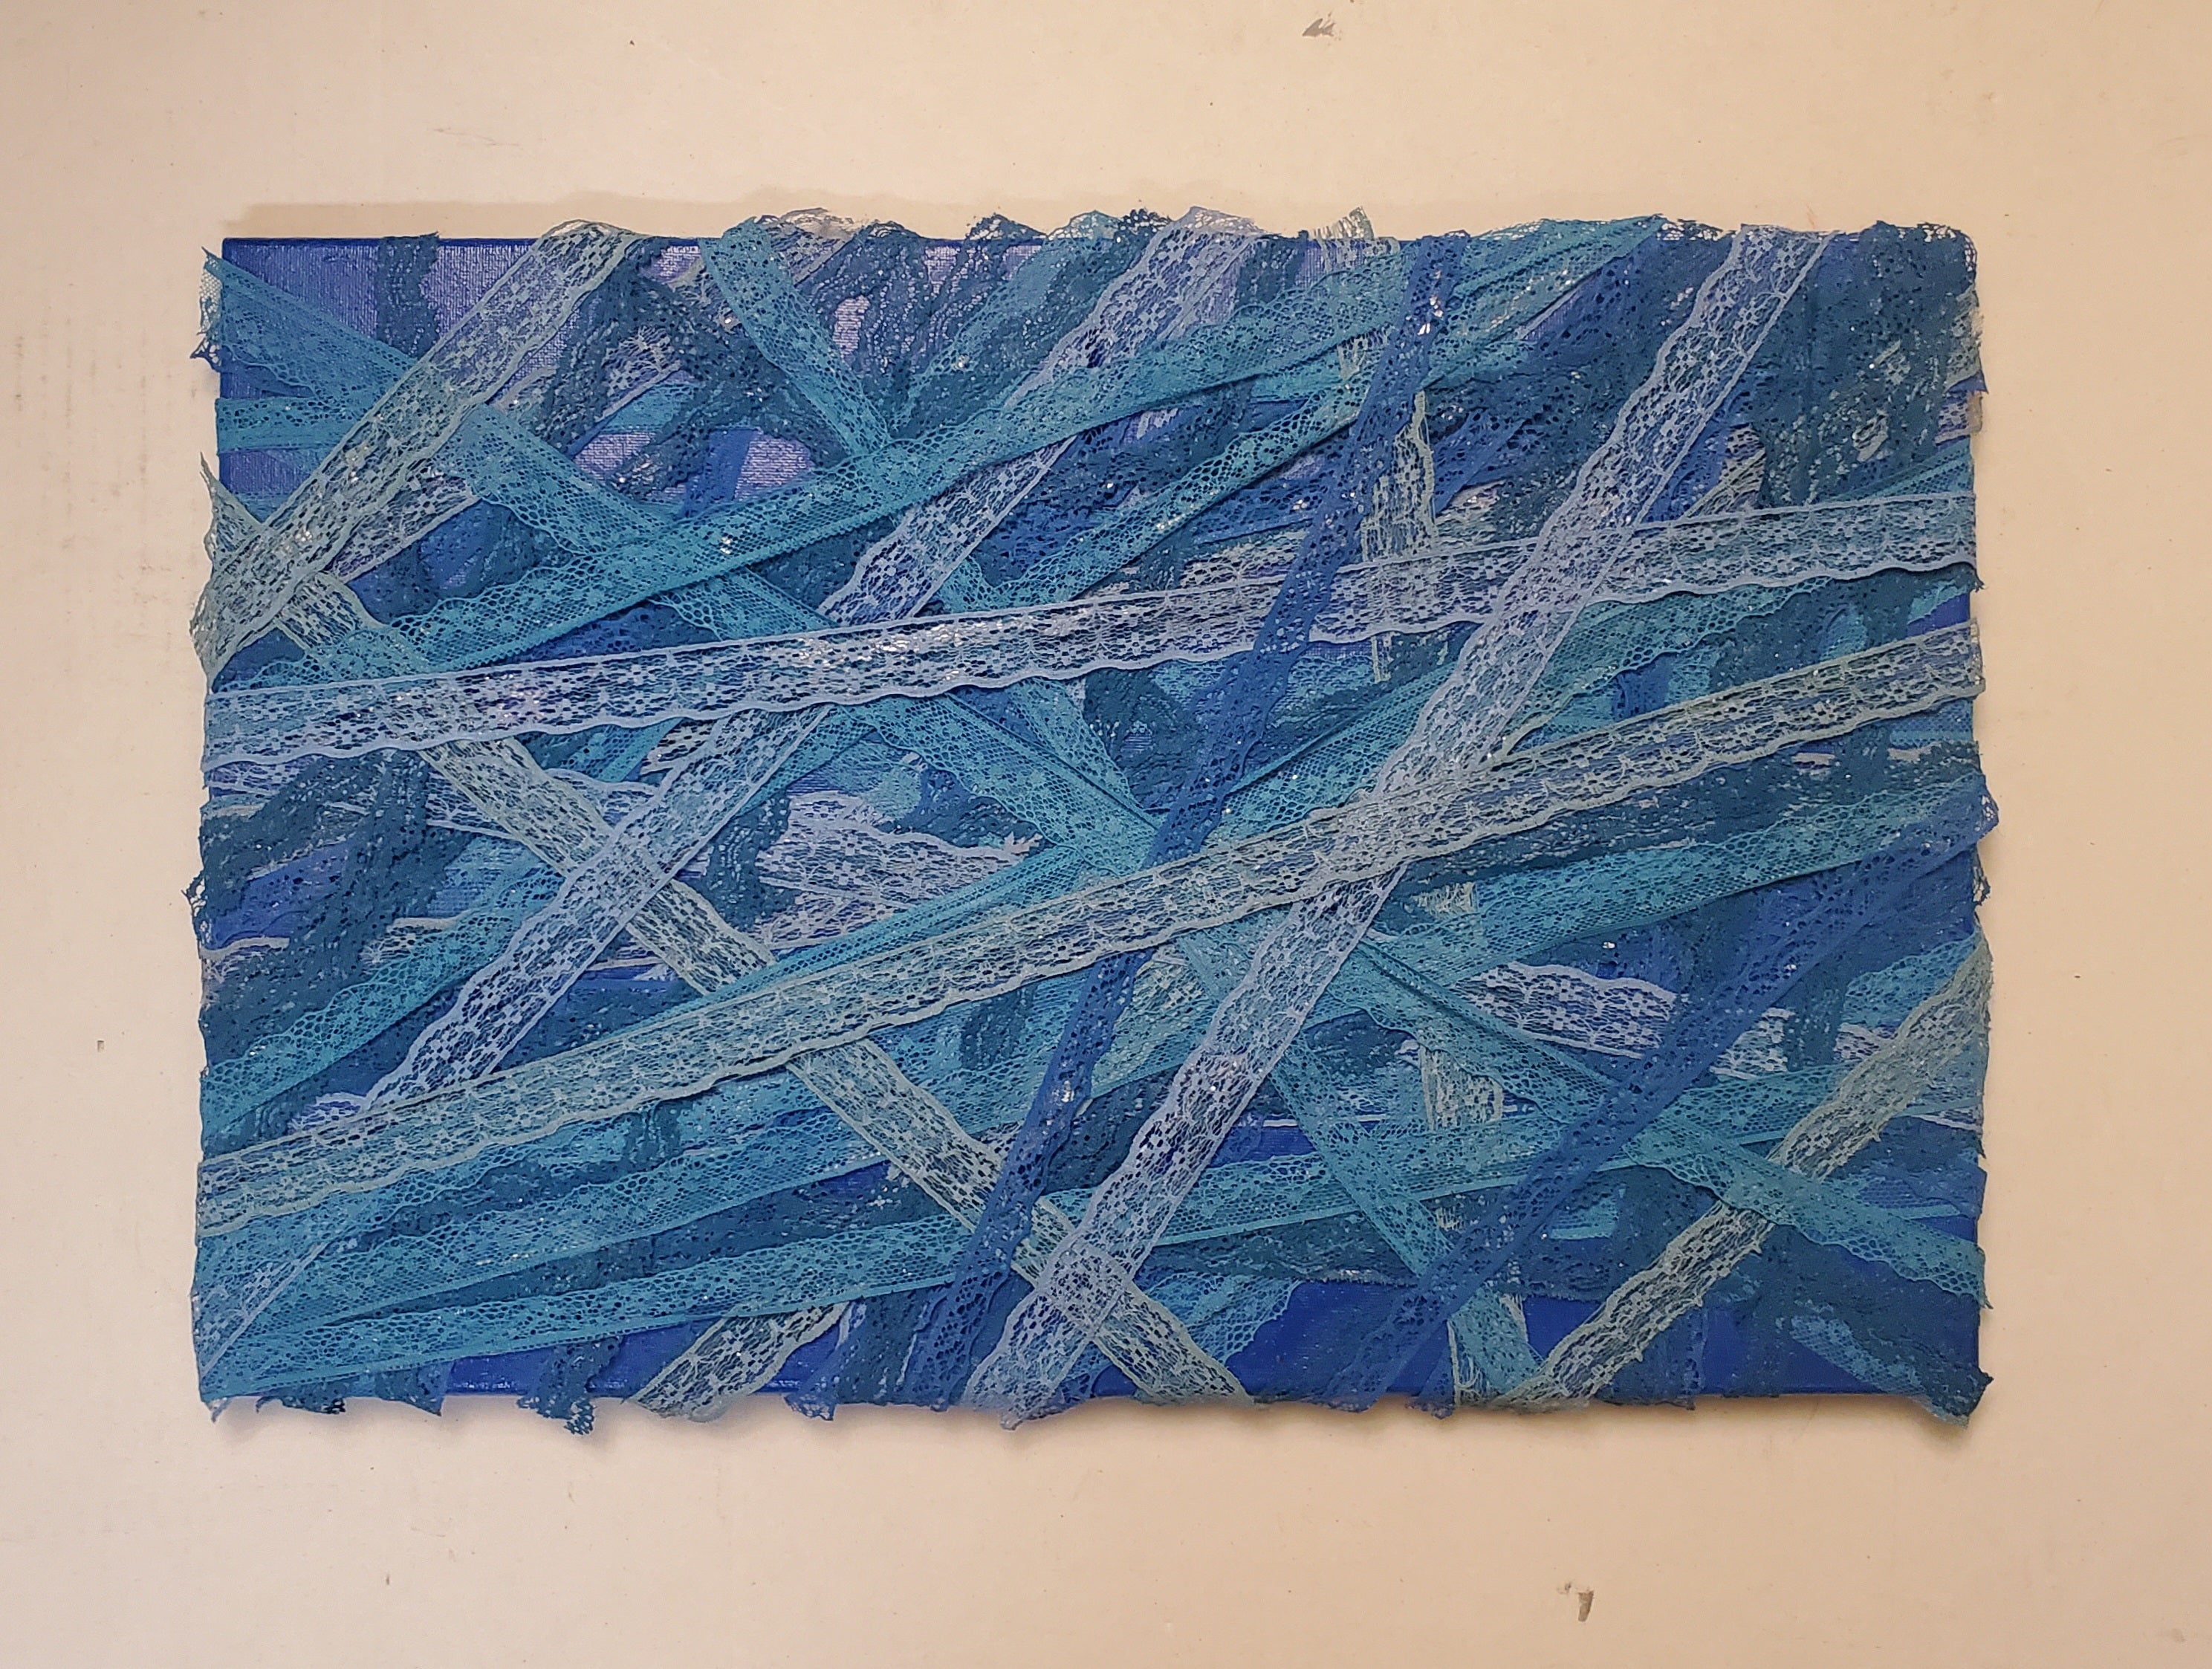 'BLUE WEBS' Acrylic, Lace, and Mixed Media on Canvas